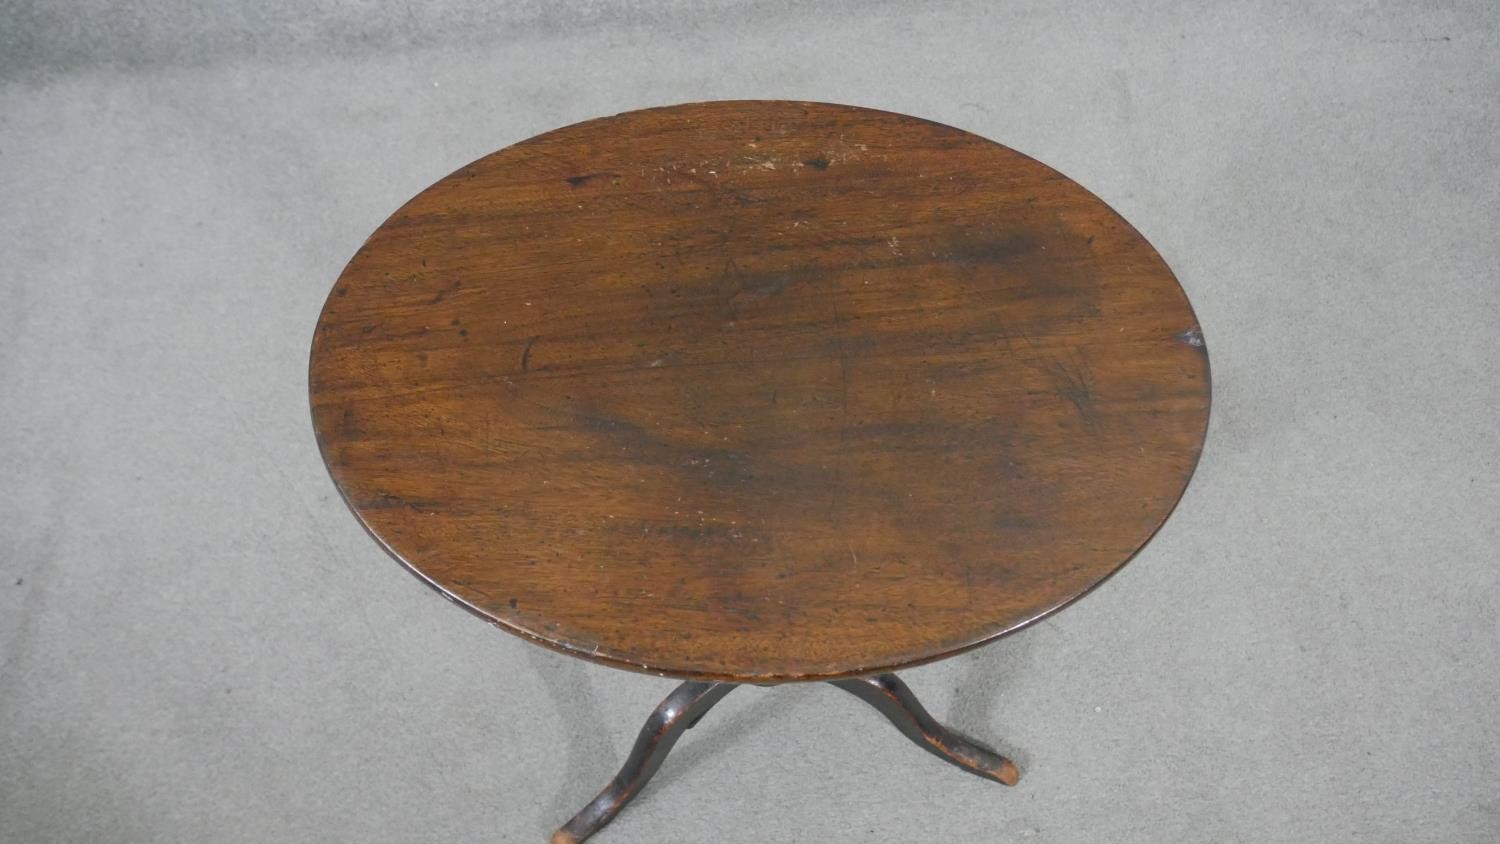 A 19th century mahogany tripod table, with a circular top on a turned stem and tripod supports, - Image 6 of 6